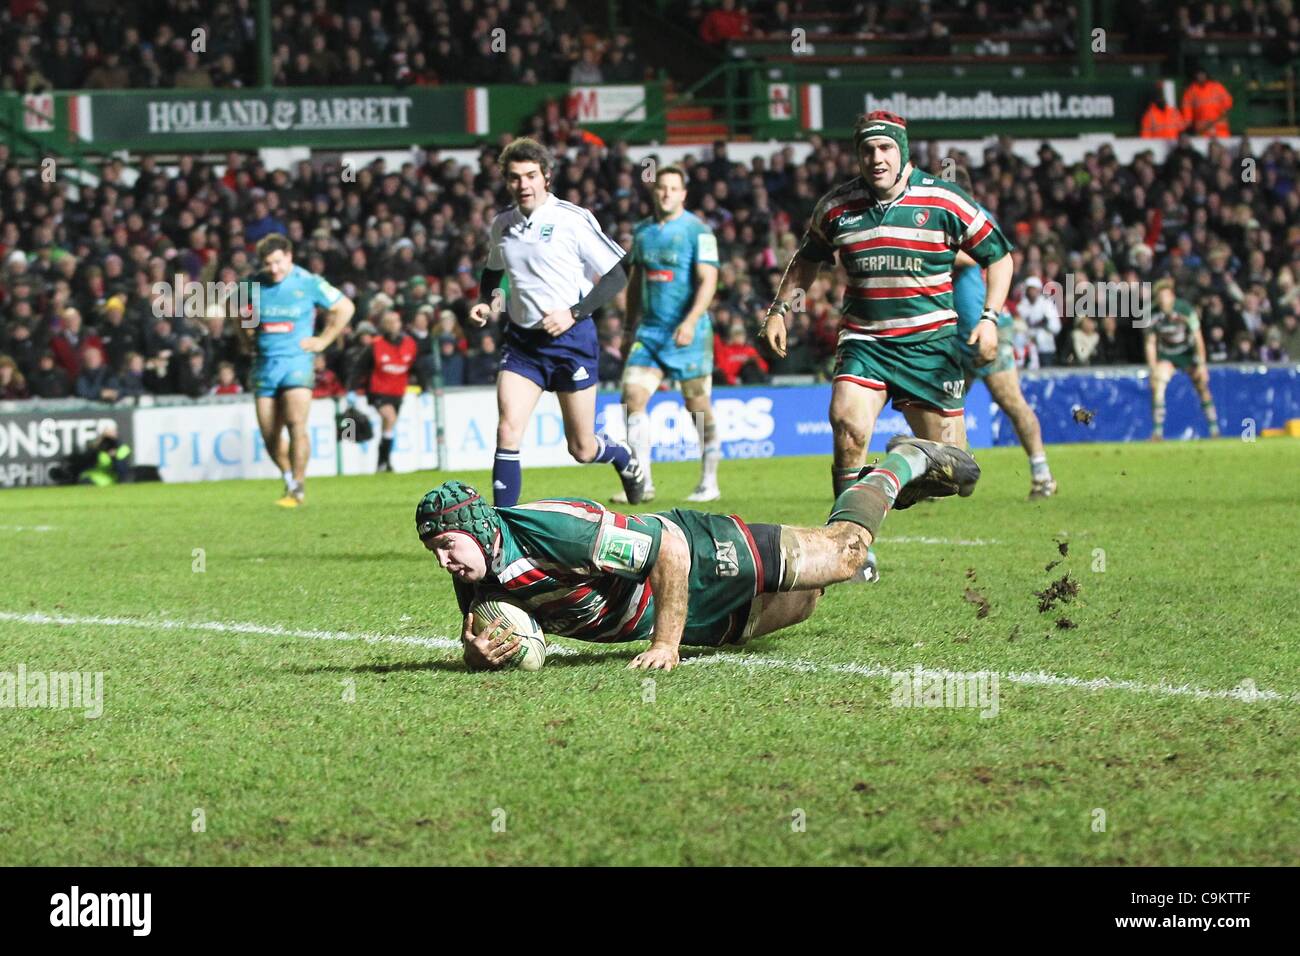 021.01.2012. Welford Road, Leicester, Inghilterra. Thomas Waldrom punteggi per Leicester Tigers durante la Heineken Cup Rugby Union gioco tra Leicester Tigers e aironi giocato al Welford Road Stadium. Foto Stock